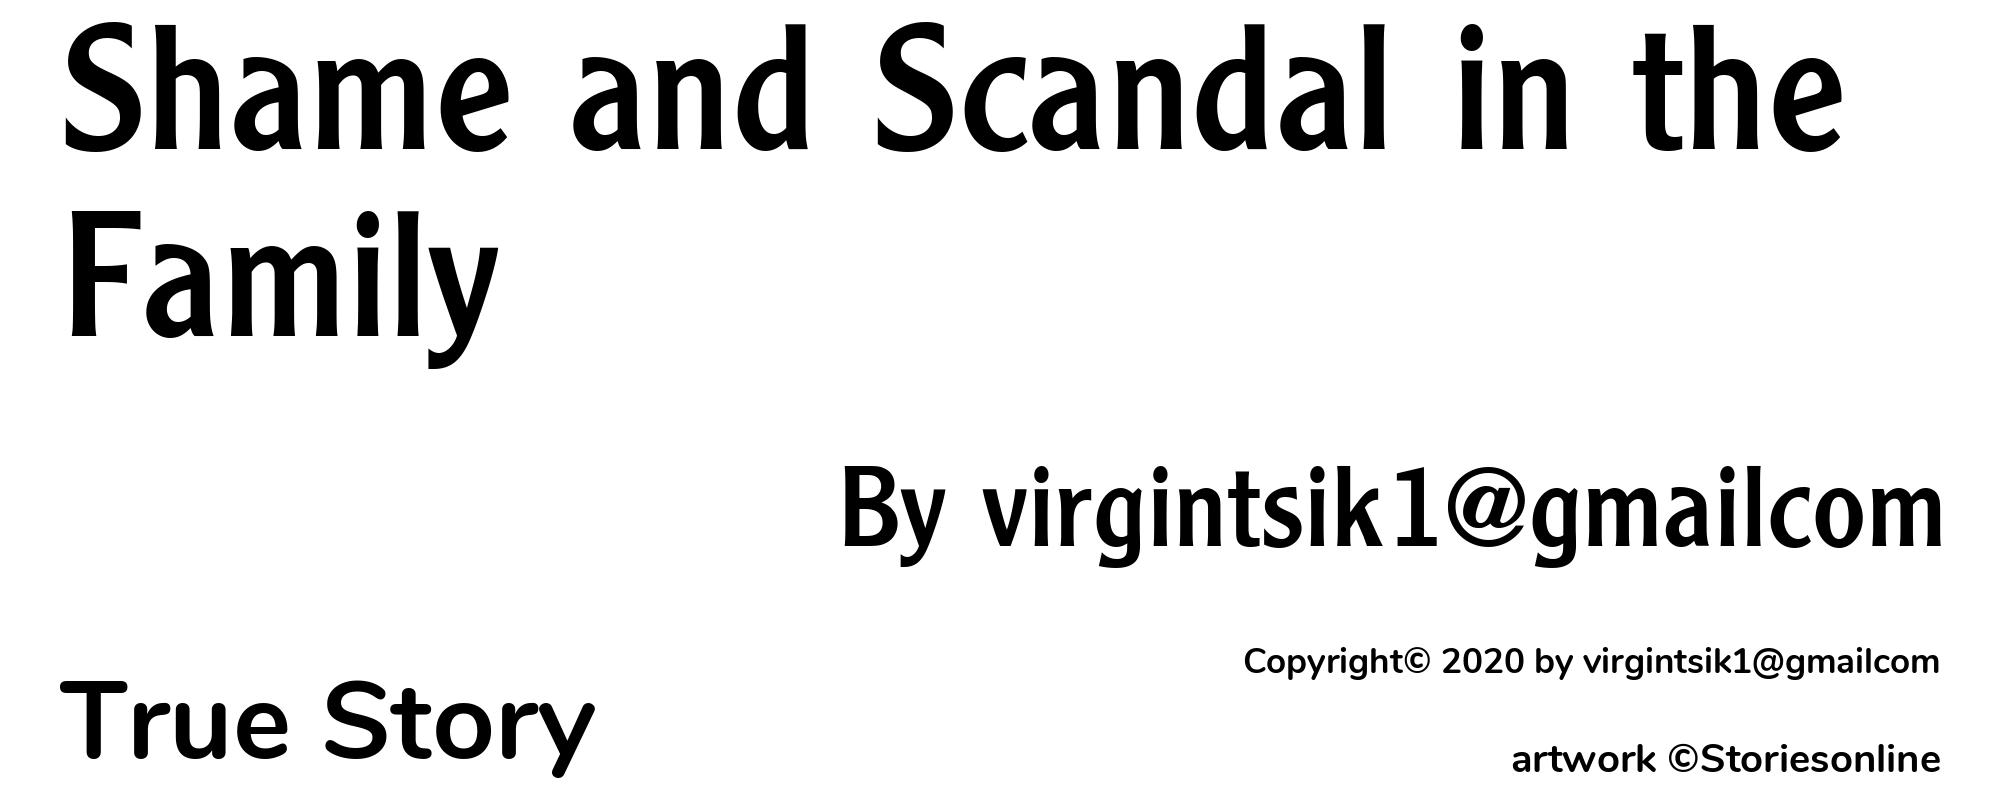 Shame and Scandal in the Family - Cover